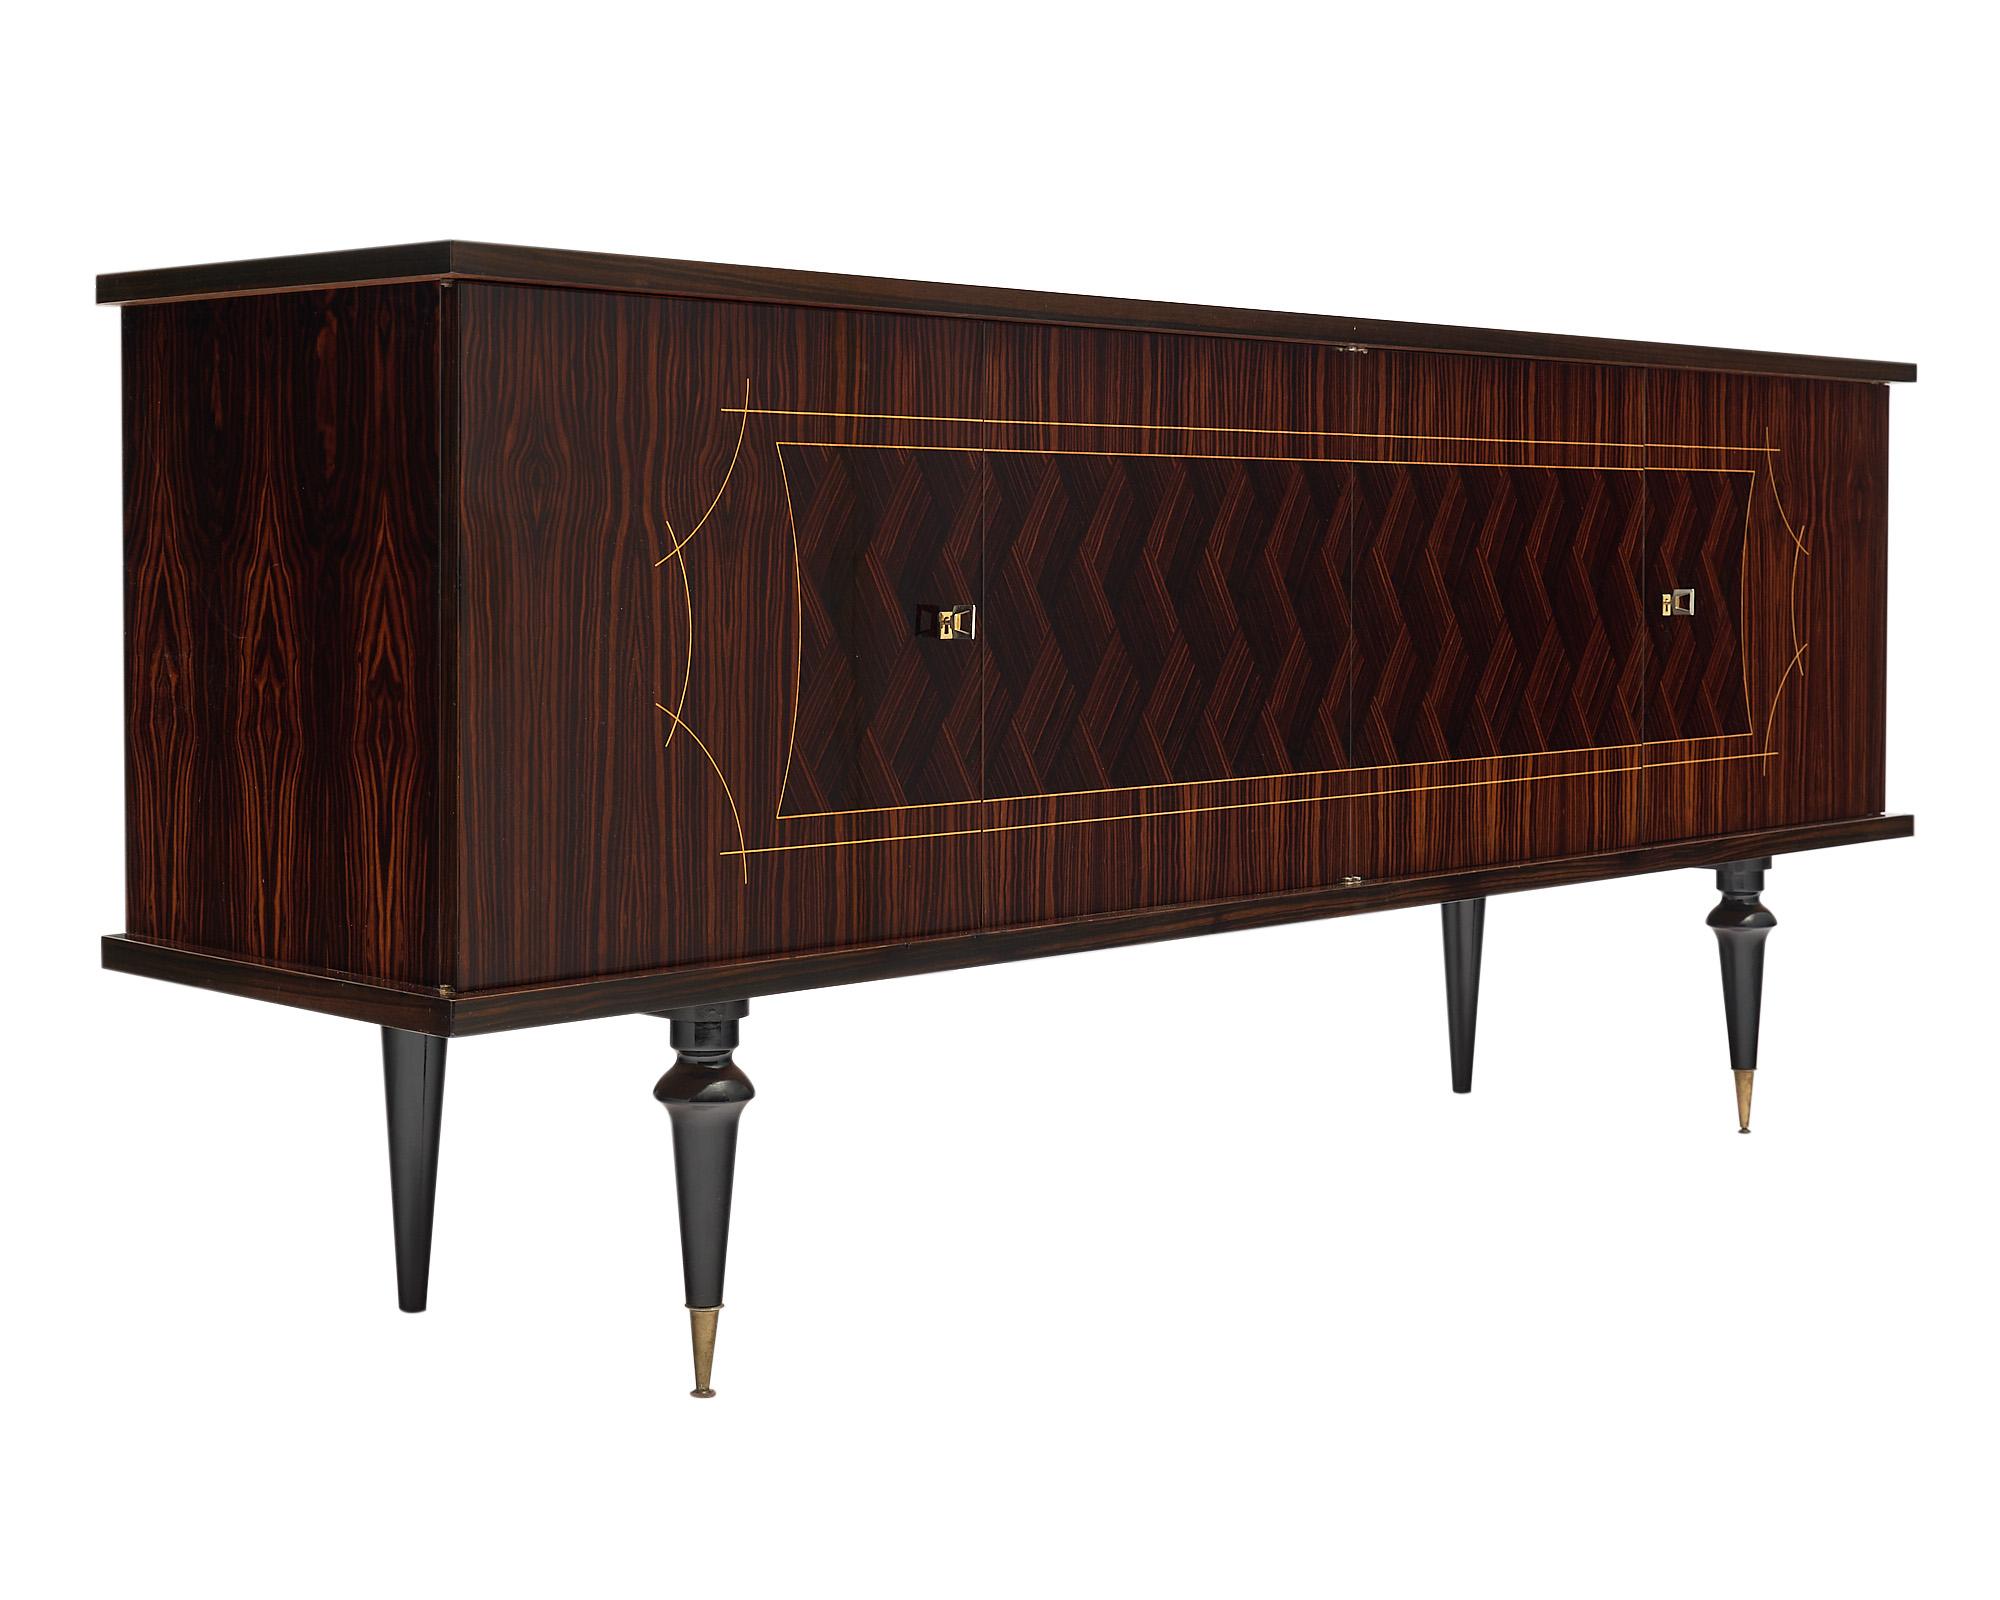 Buffet, French modernist, made of Macassar of ebony wood in a chevron decorative pattern and satin wood inlays. This enfilade features four ebonized turned legs supporting a cabinet with two sets of double doors closing on adjustable lemon wood